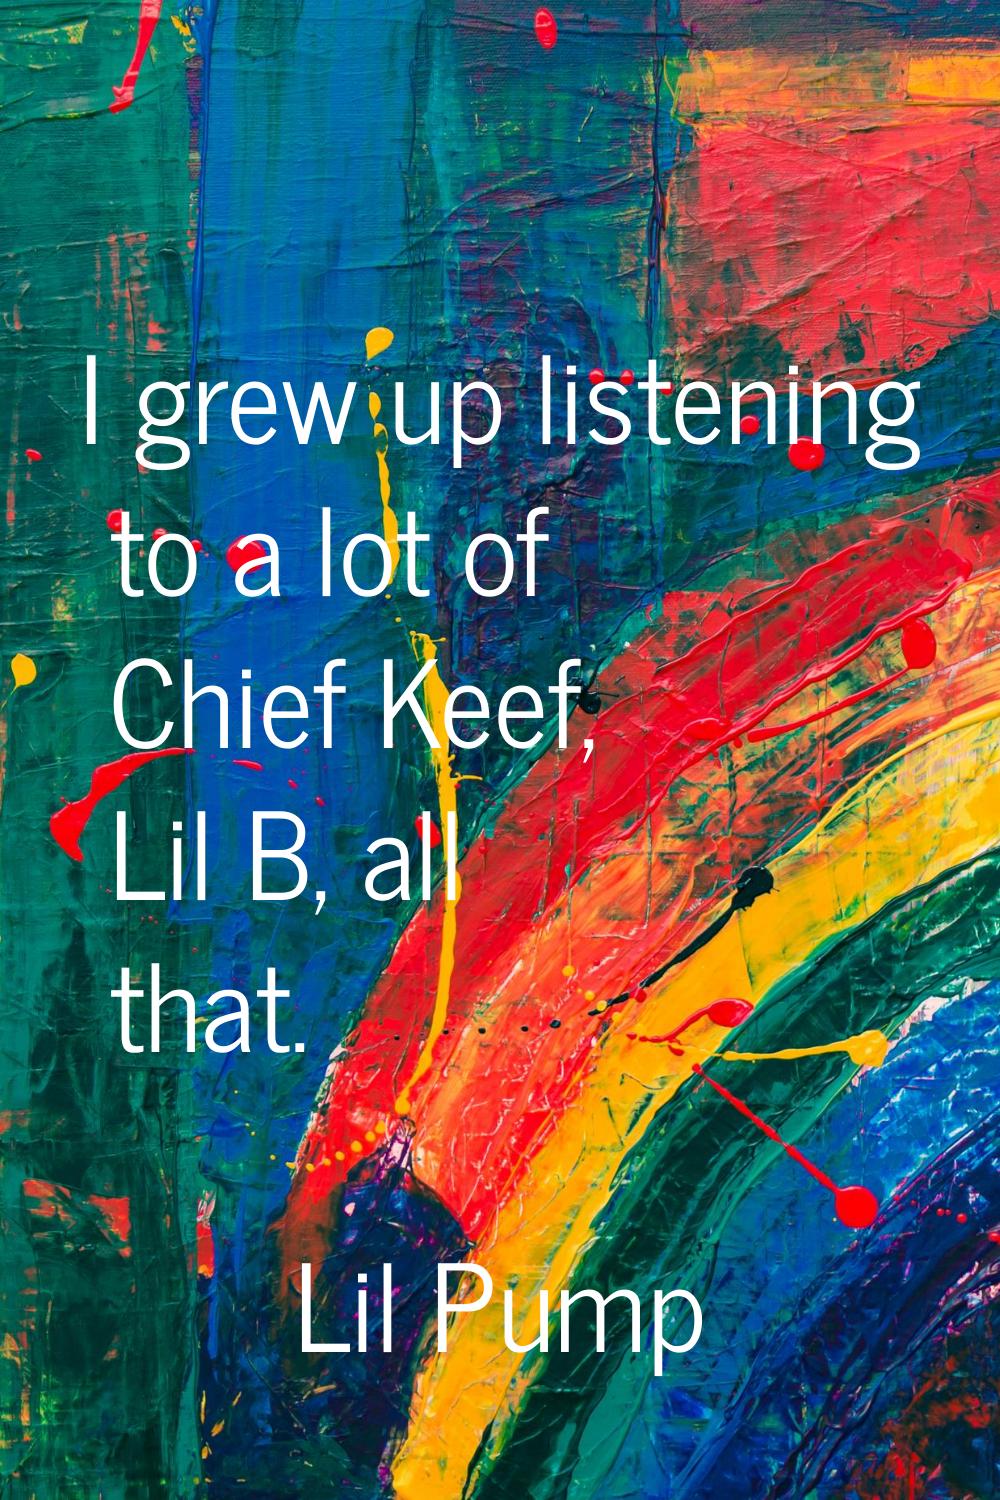 I grew up listening to a lot of Chief Keef, Lil B, all that.